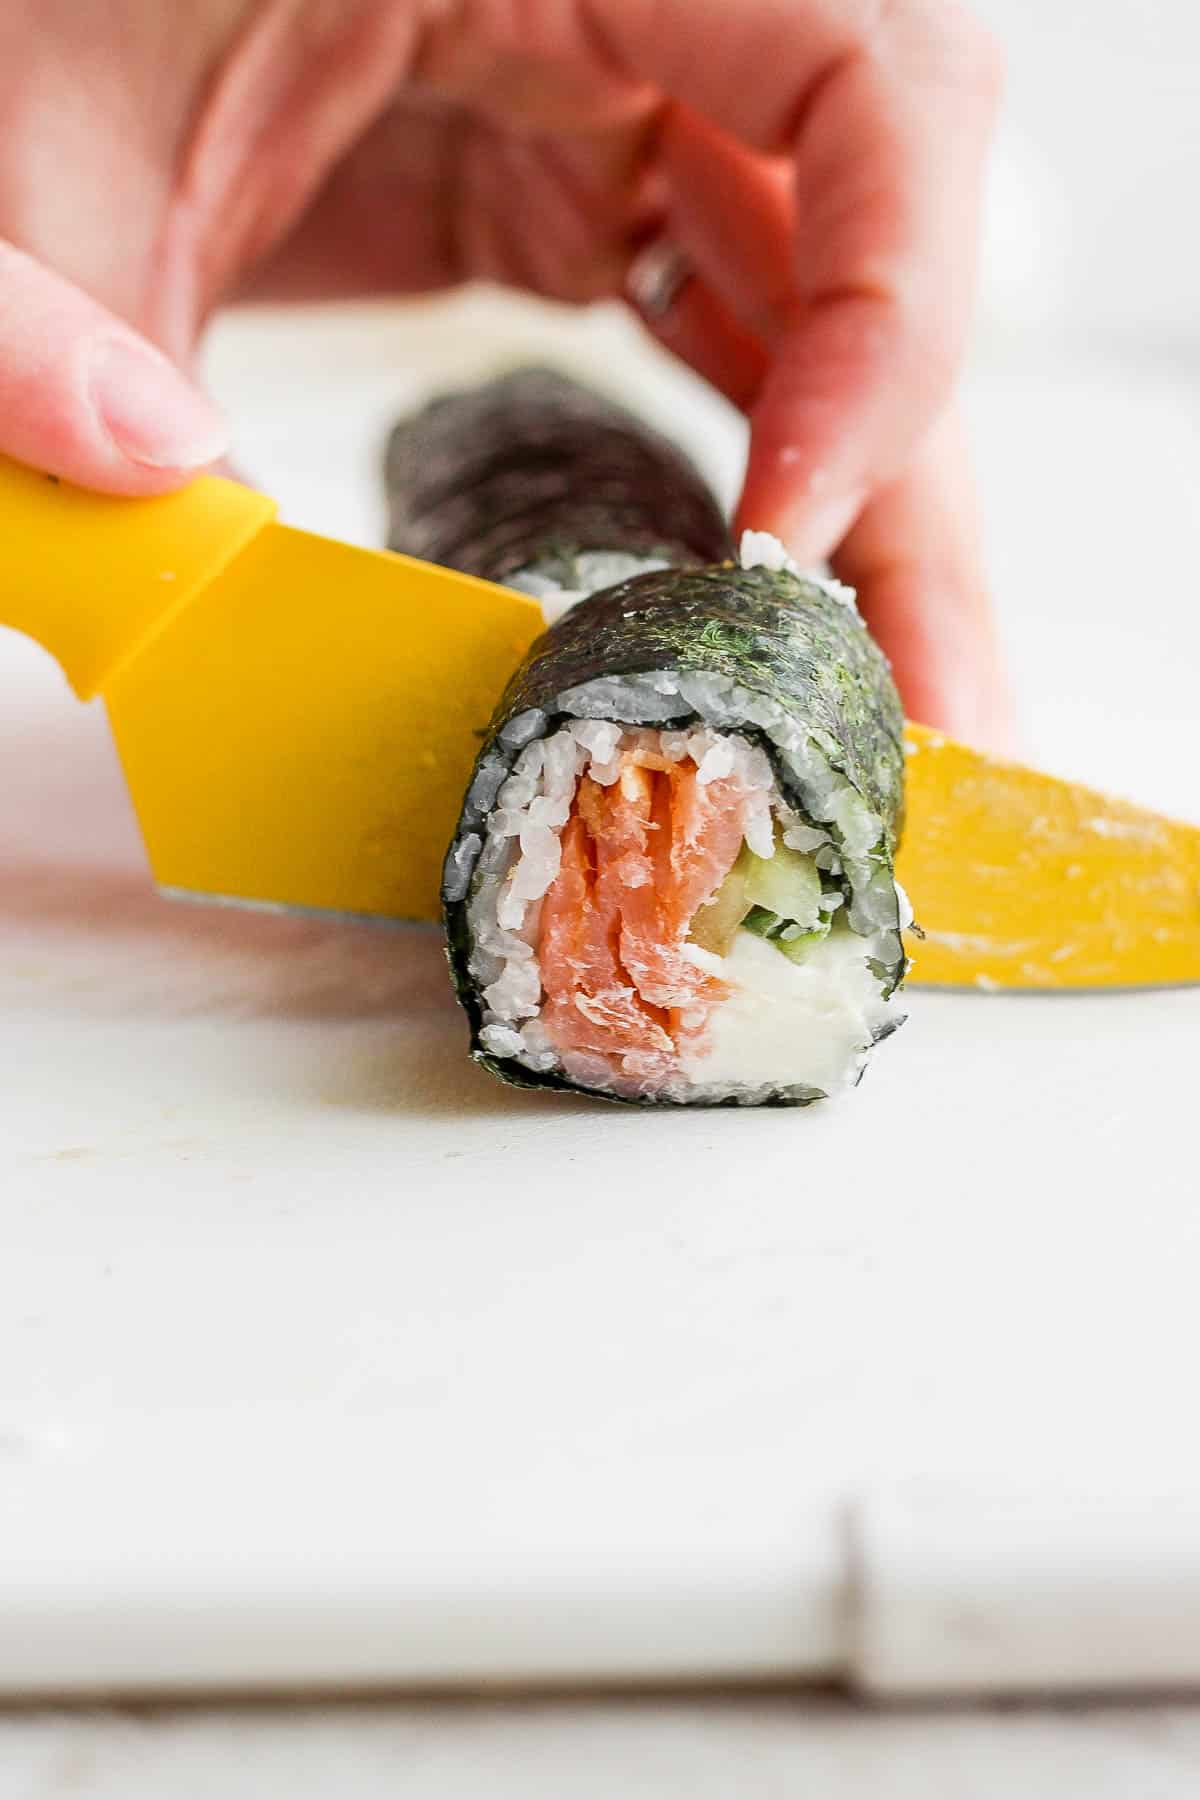 A sharp knife cutting the philadelphia roll into pieces.